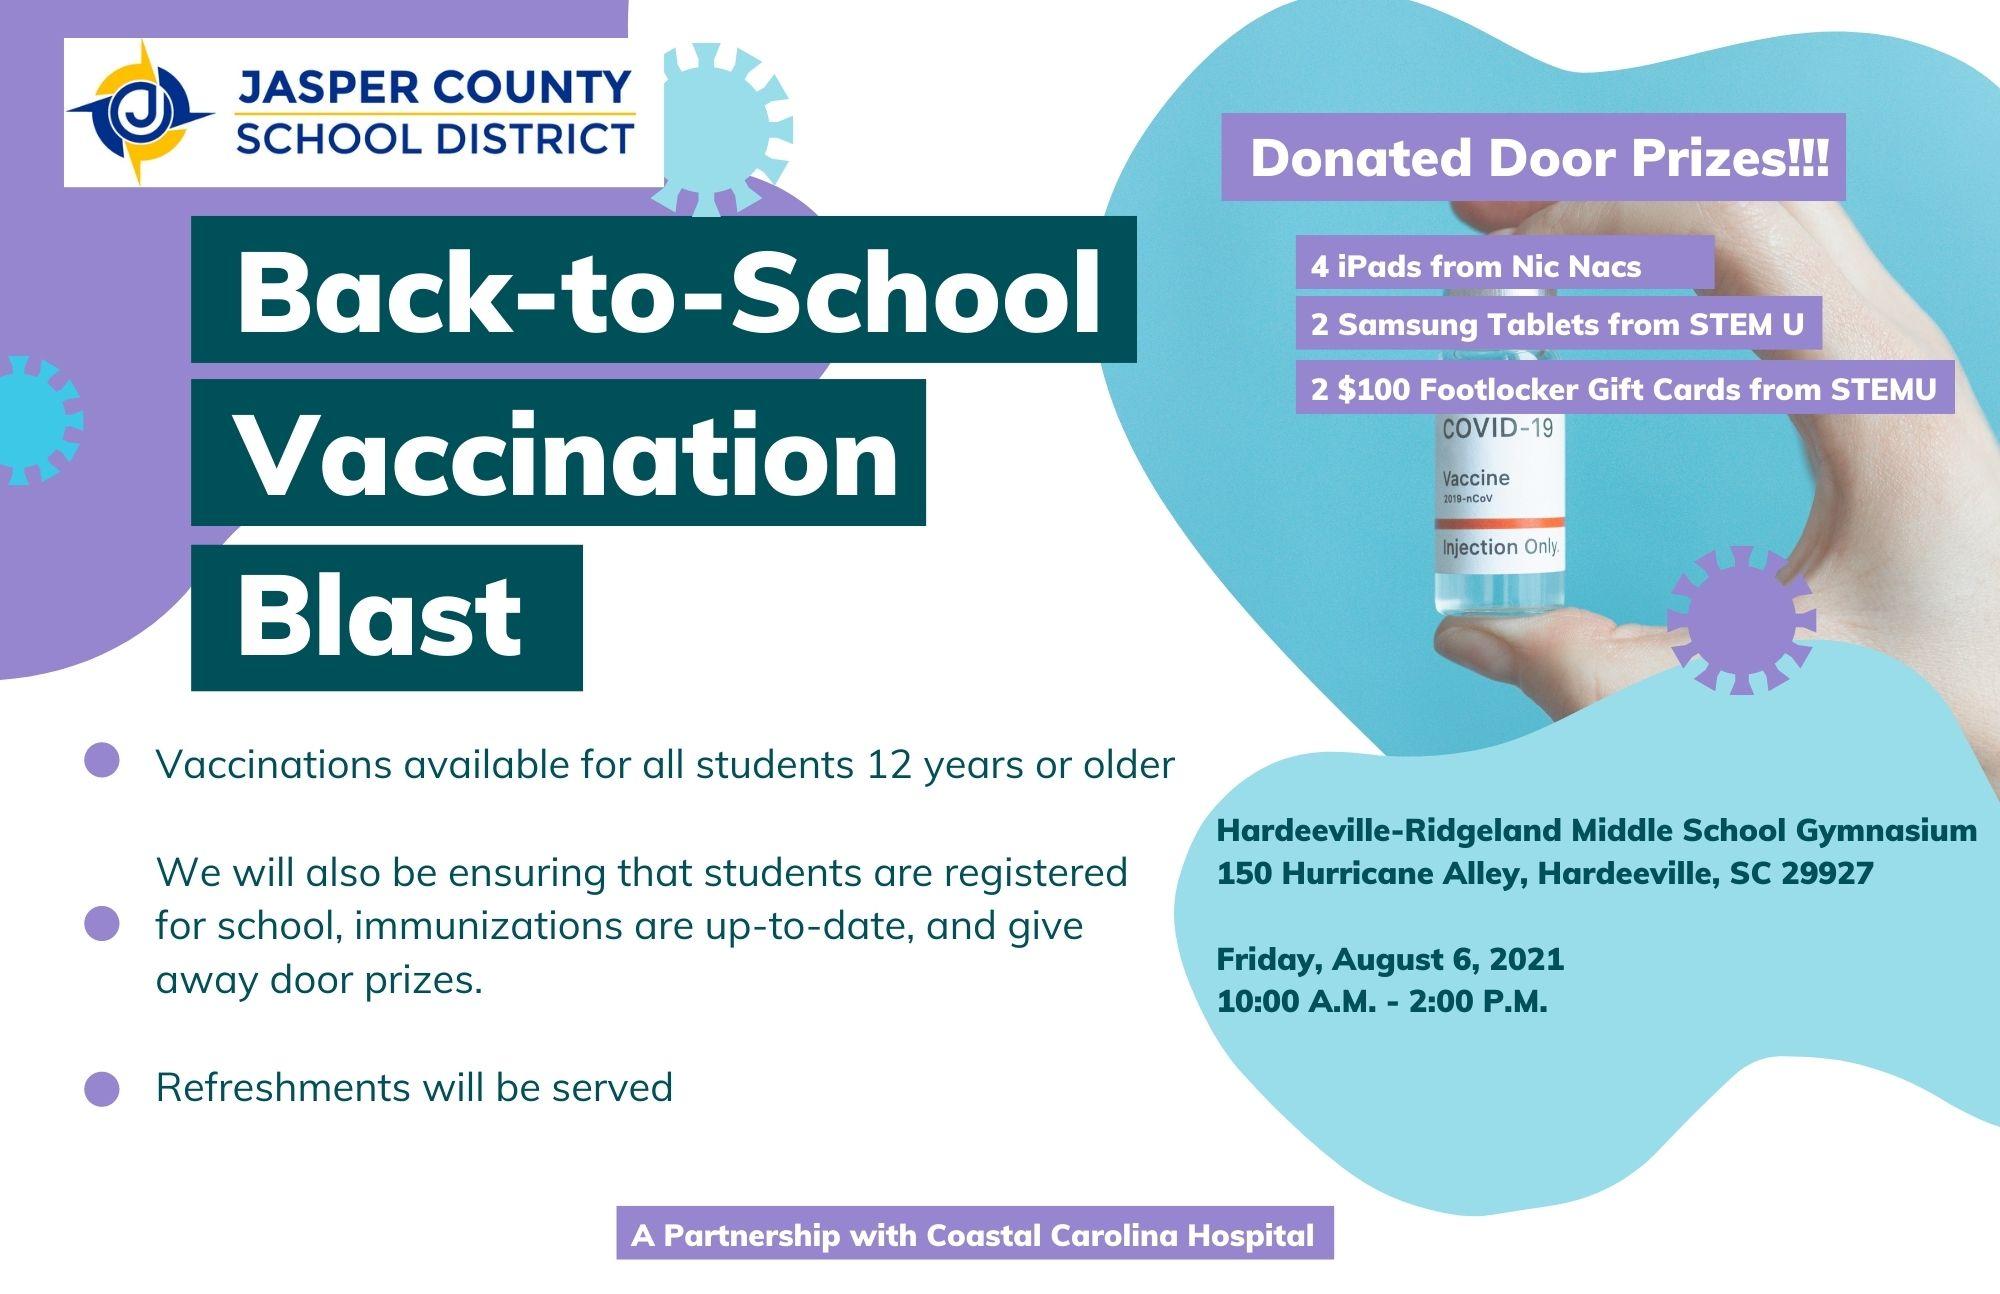 Vaccination event